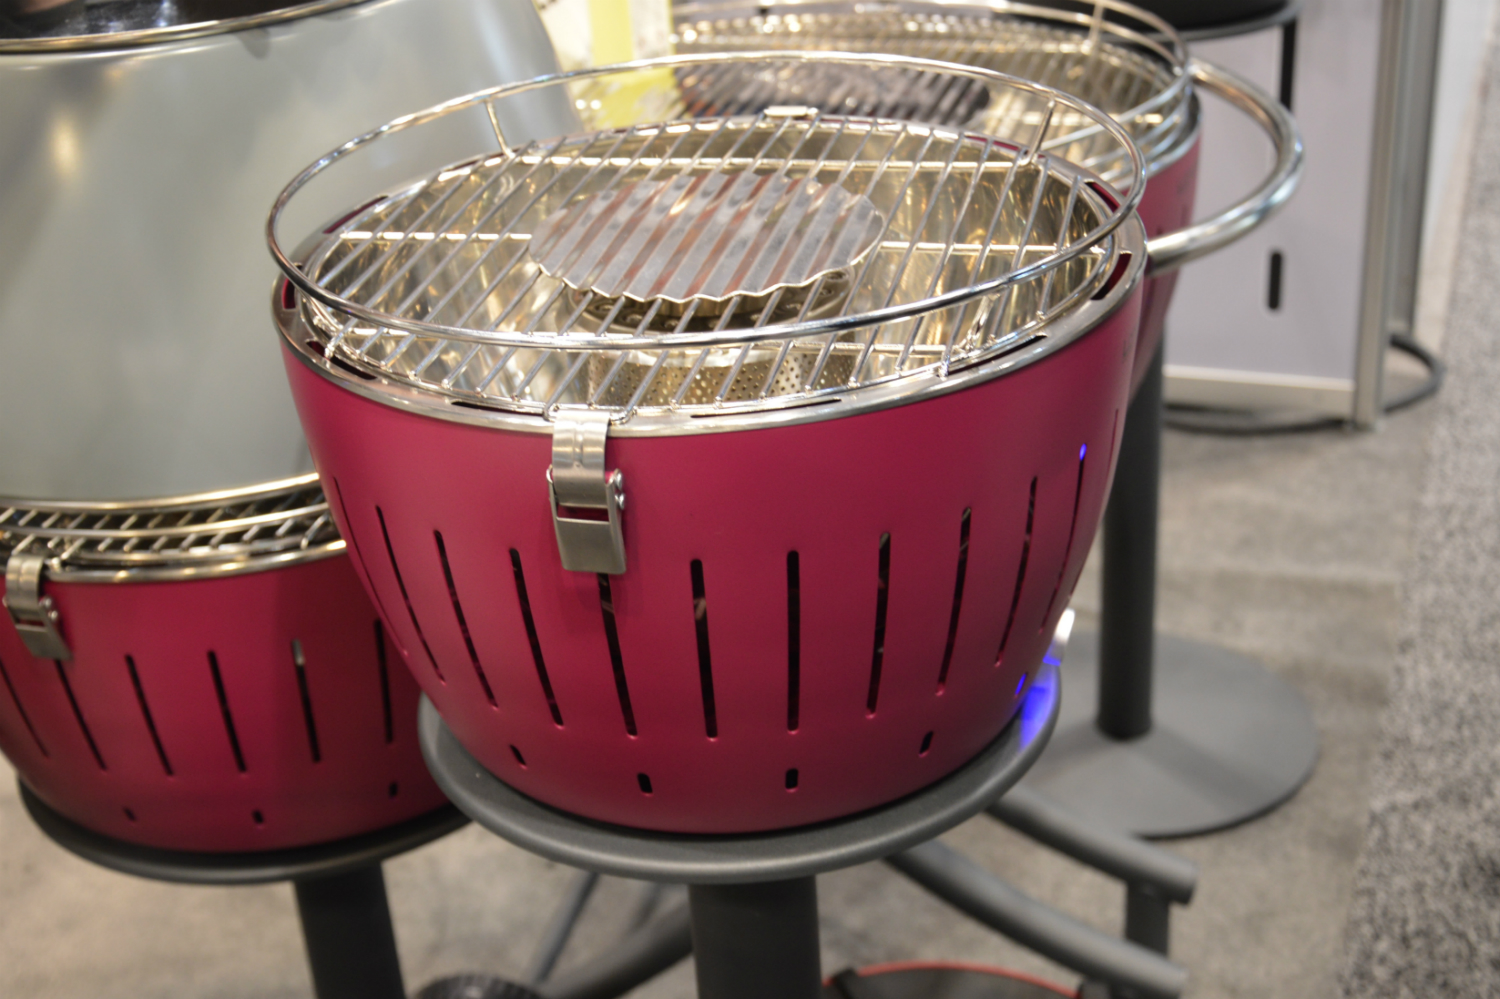 Lotus Grill charcoal barbecue review - Review